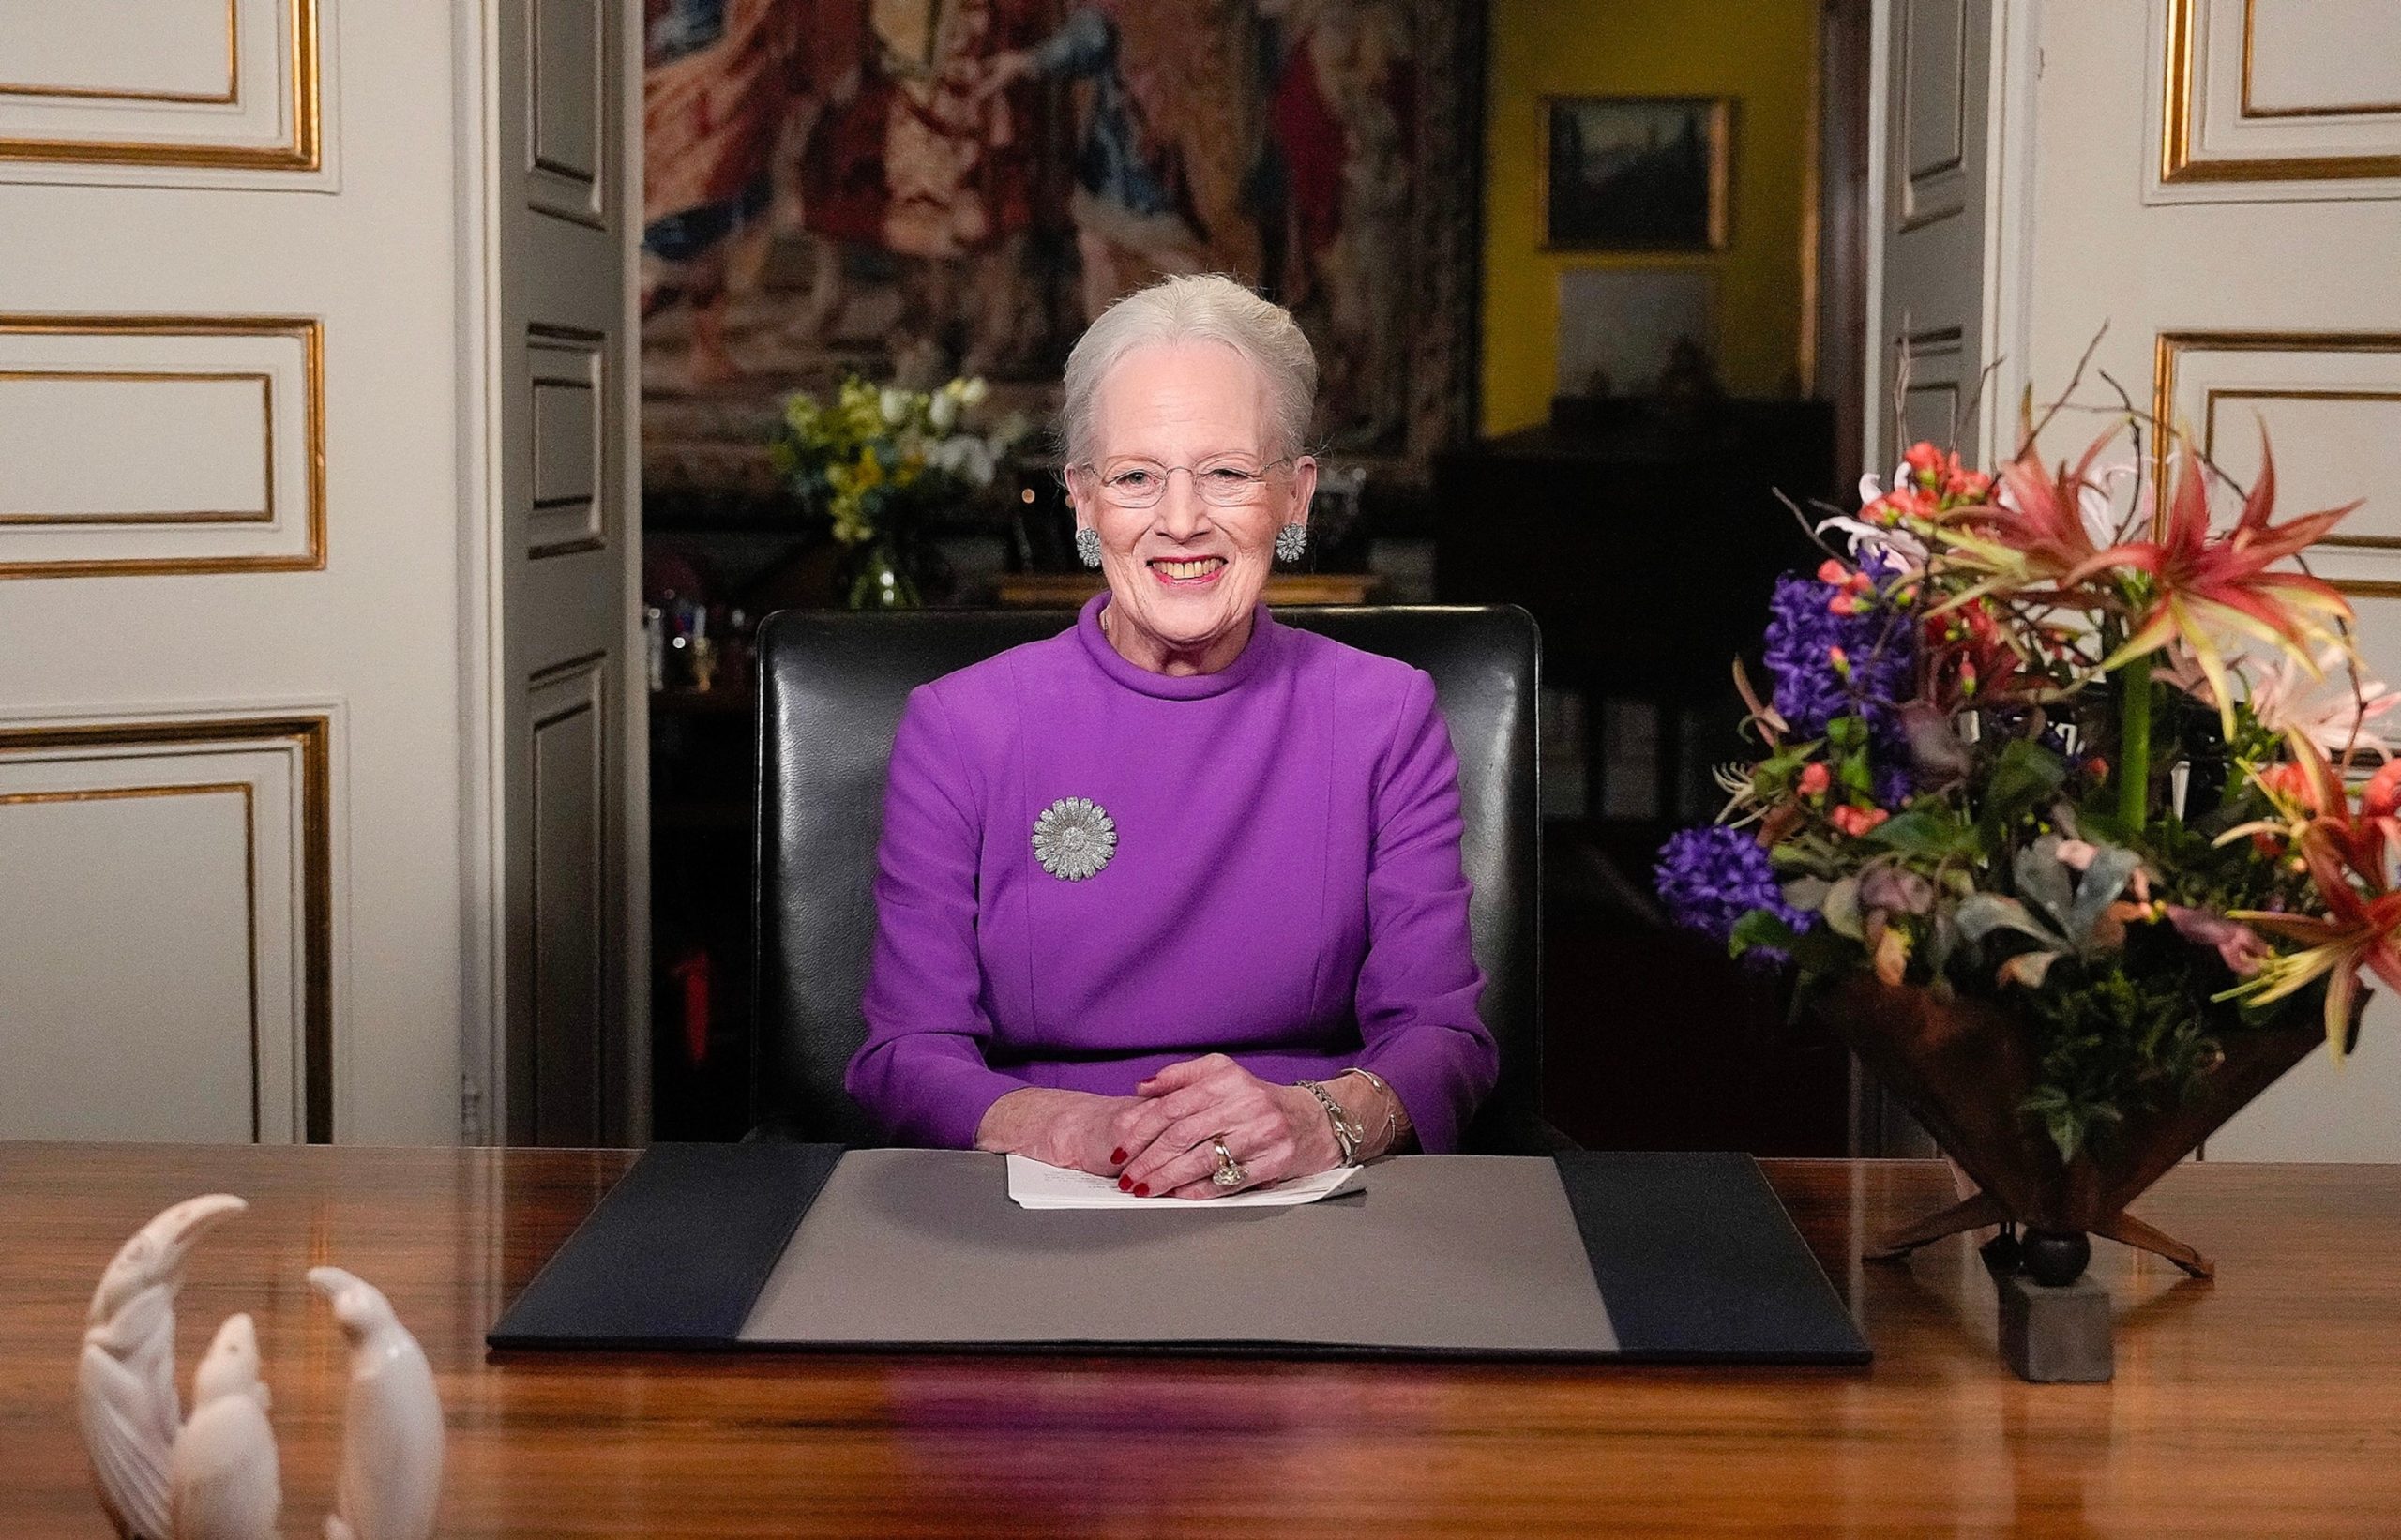 Queen of Denmark Announces Abdication of Throne in New Year's Speech